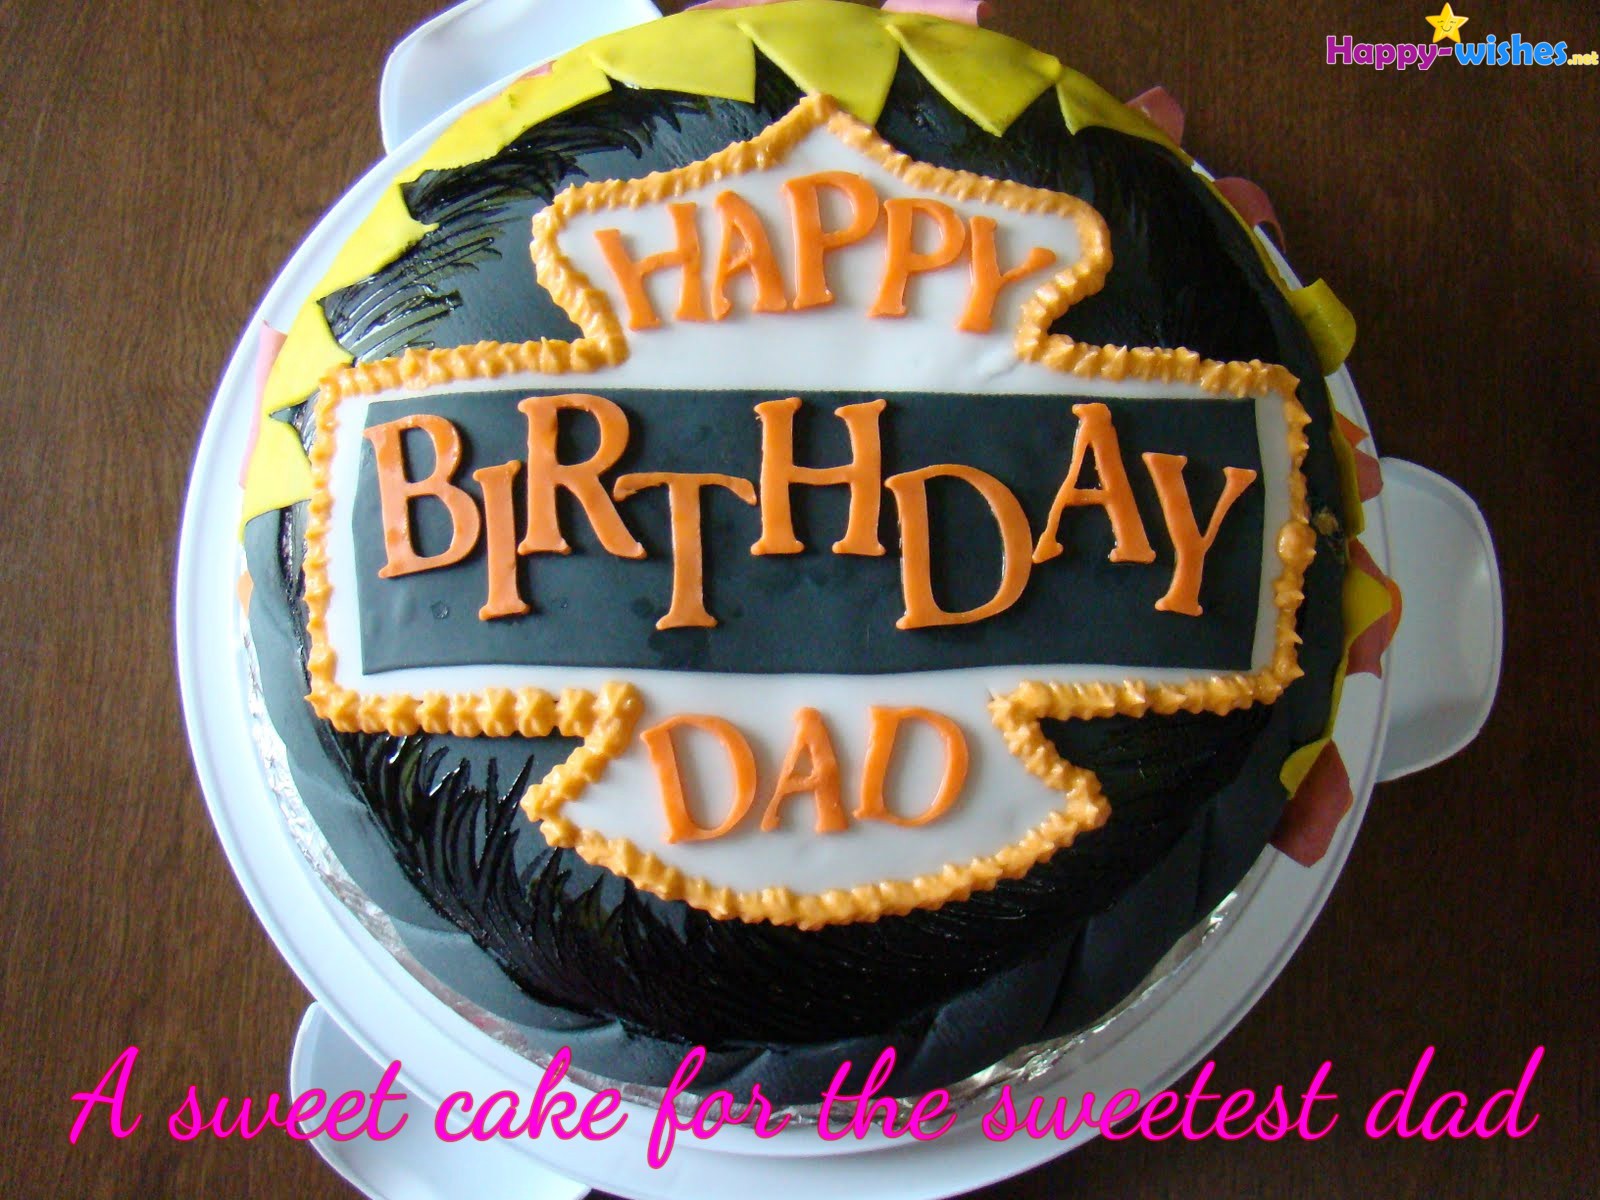 Happy Birthday Images For Dad - Happy Birthday Daddy Cake - HD Wallpaper 